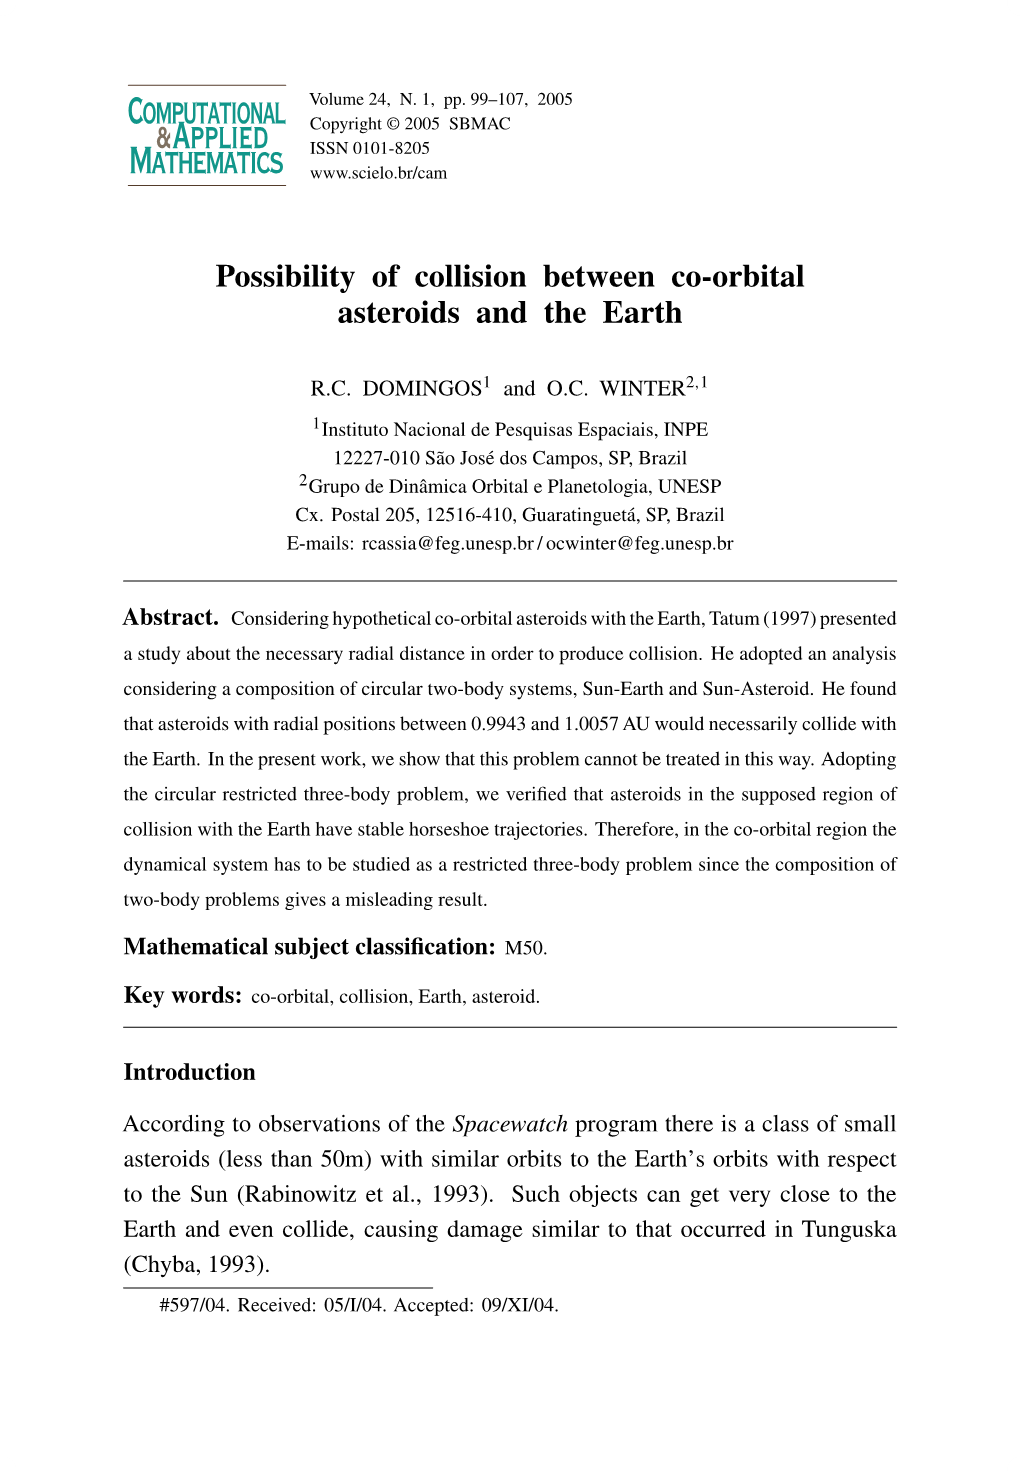 Possibility of Collision Between Co-Orbital Asteroids and the Earth